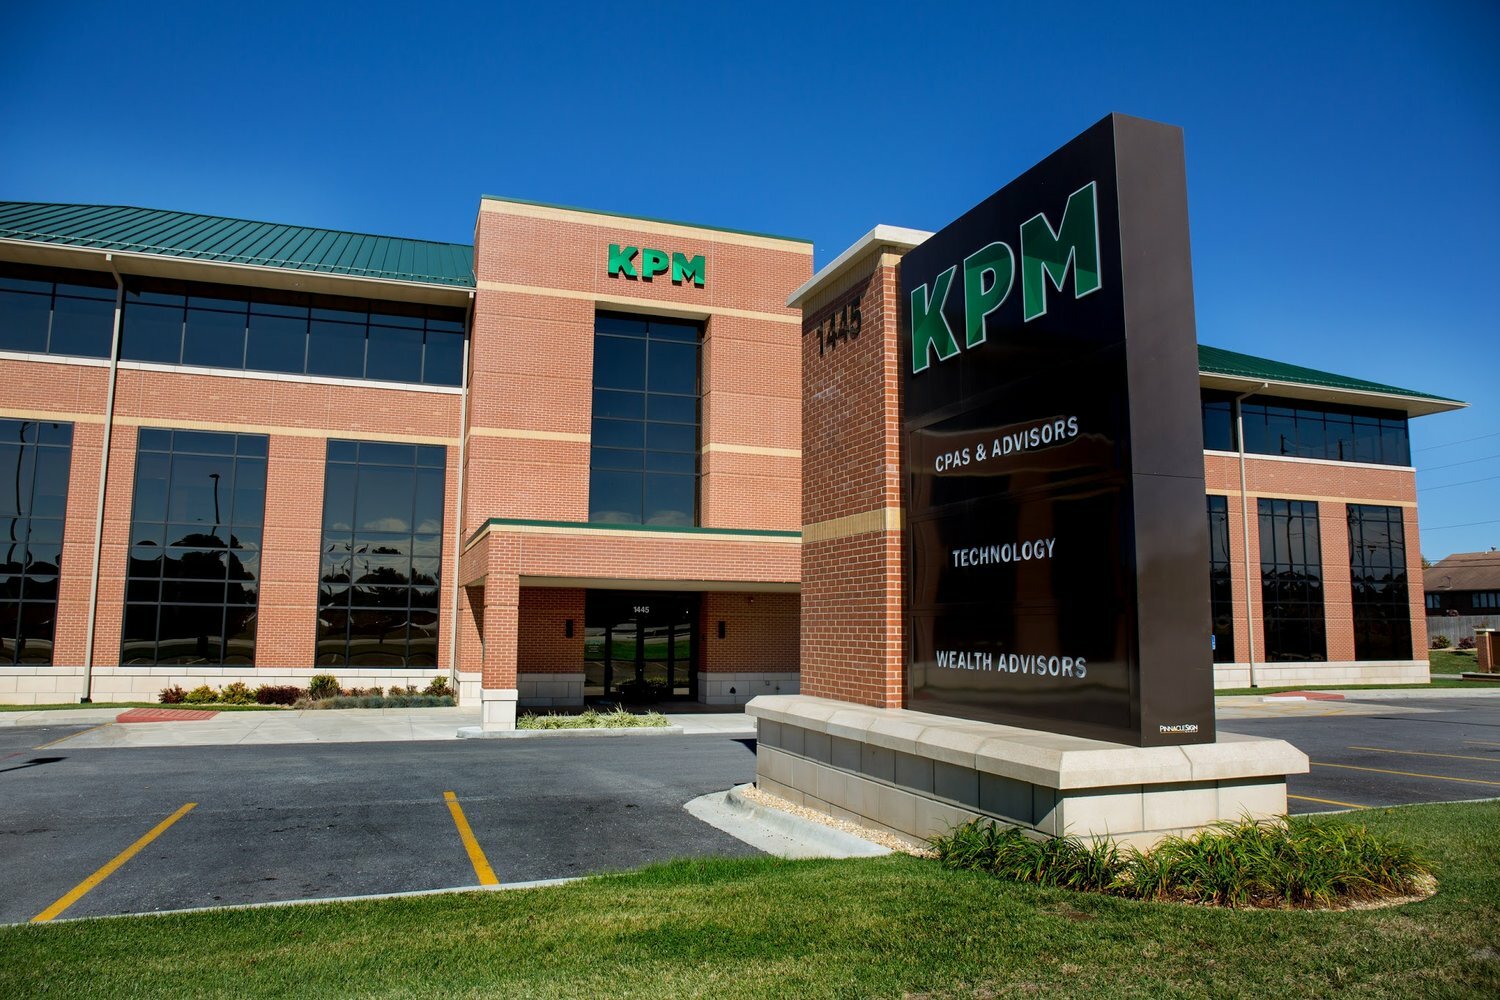 KPM CPAs & Advisors comes in at No. 253.